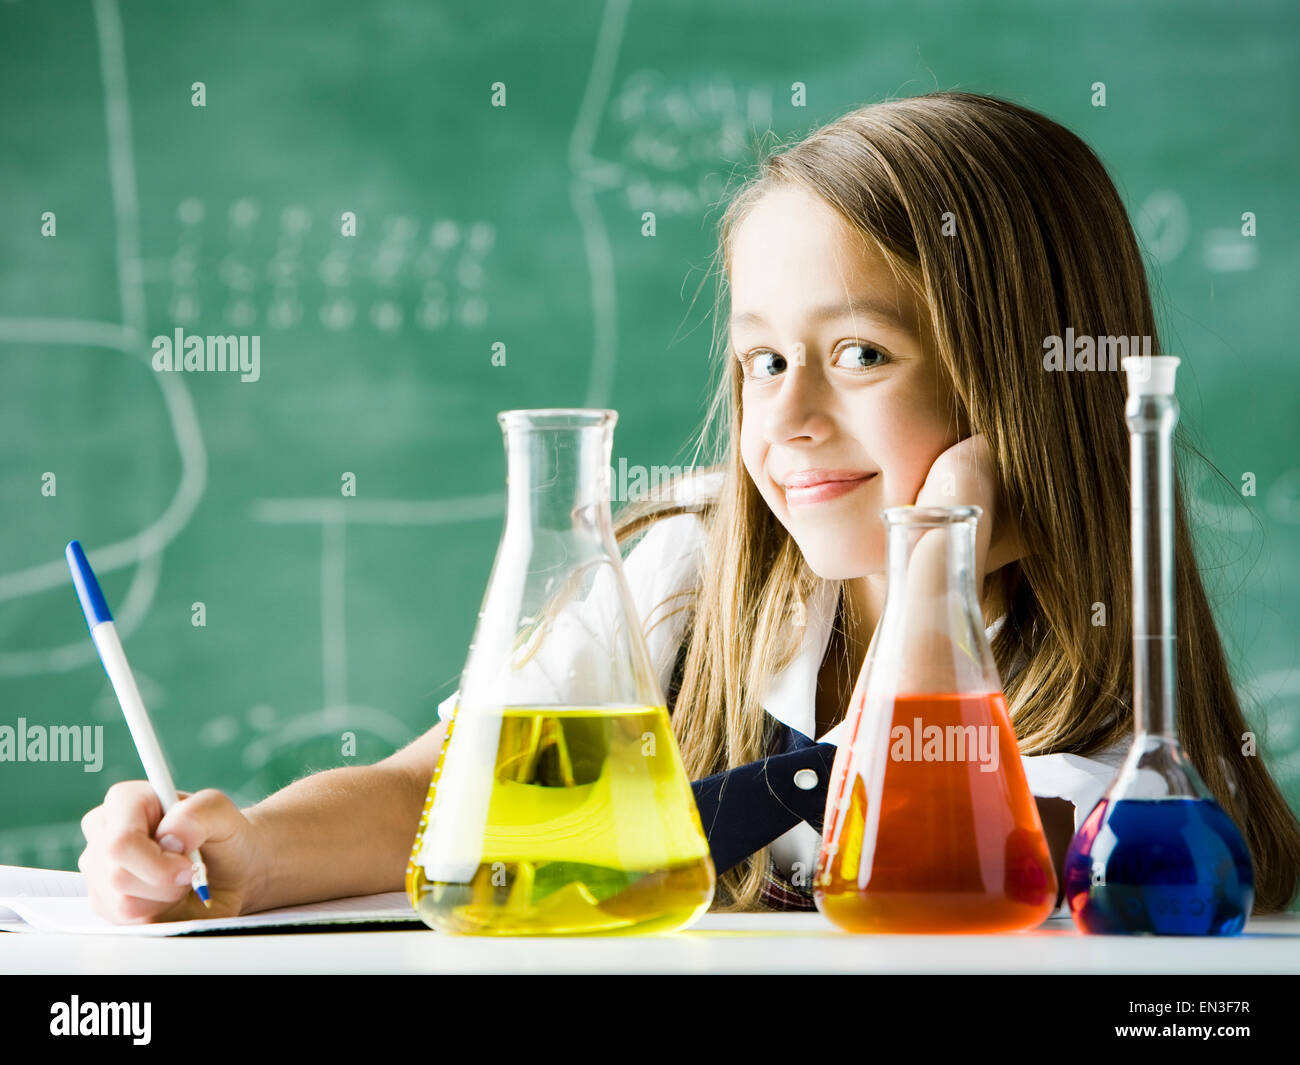 girl in a classroom with an erlenmeyer flask Stock Photo